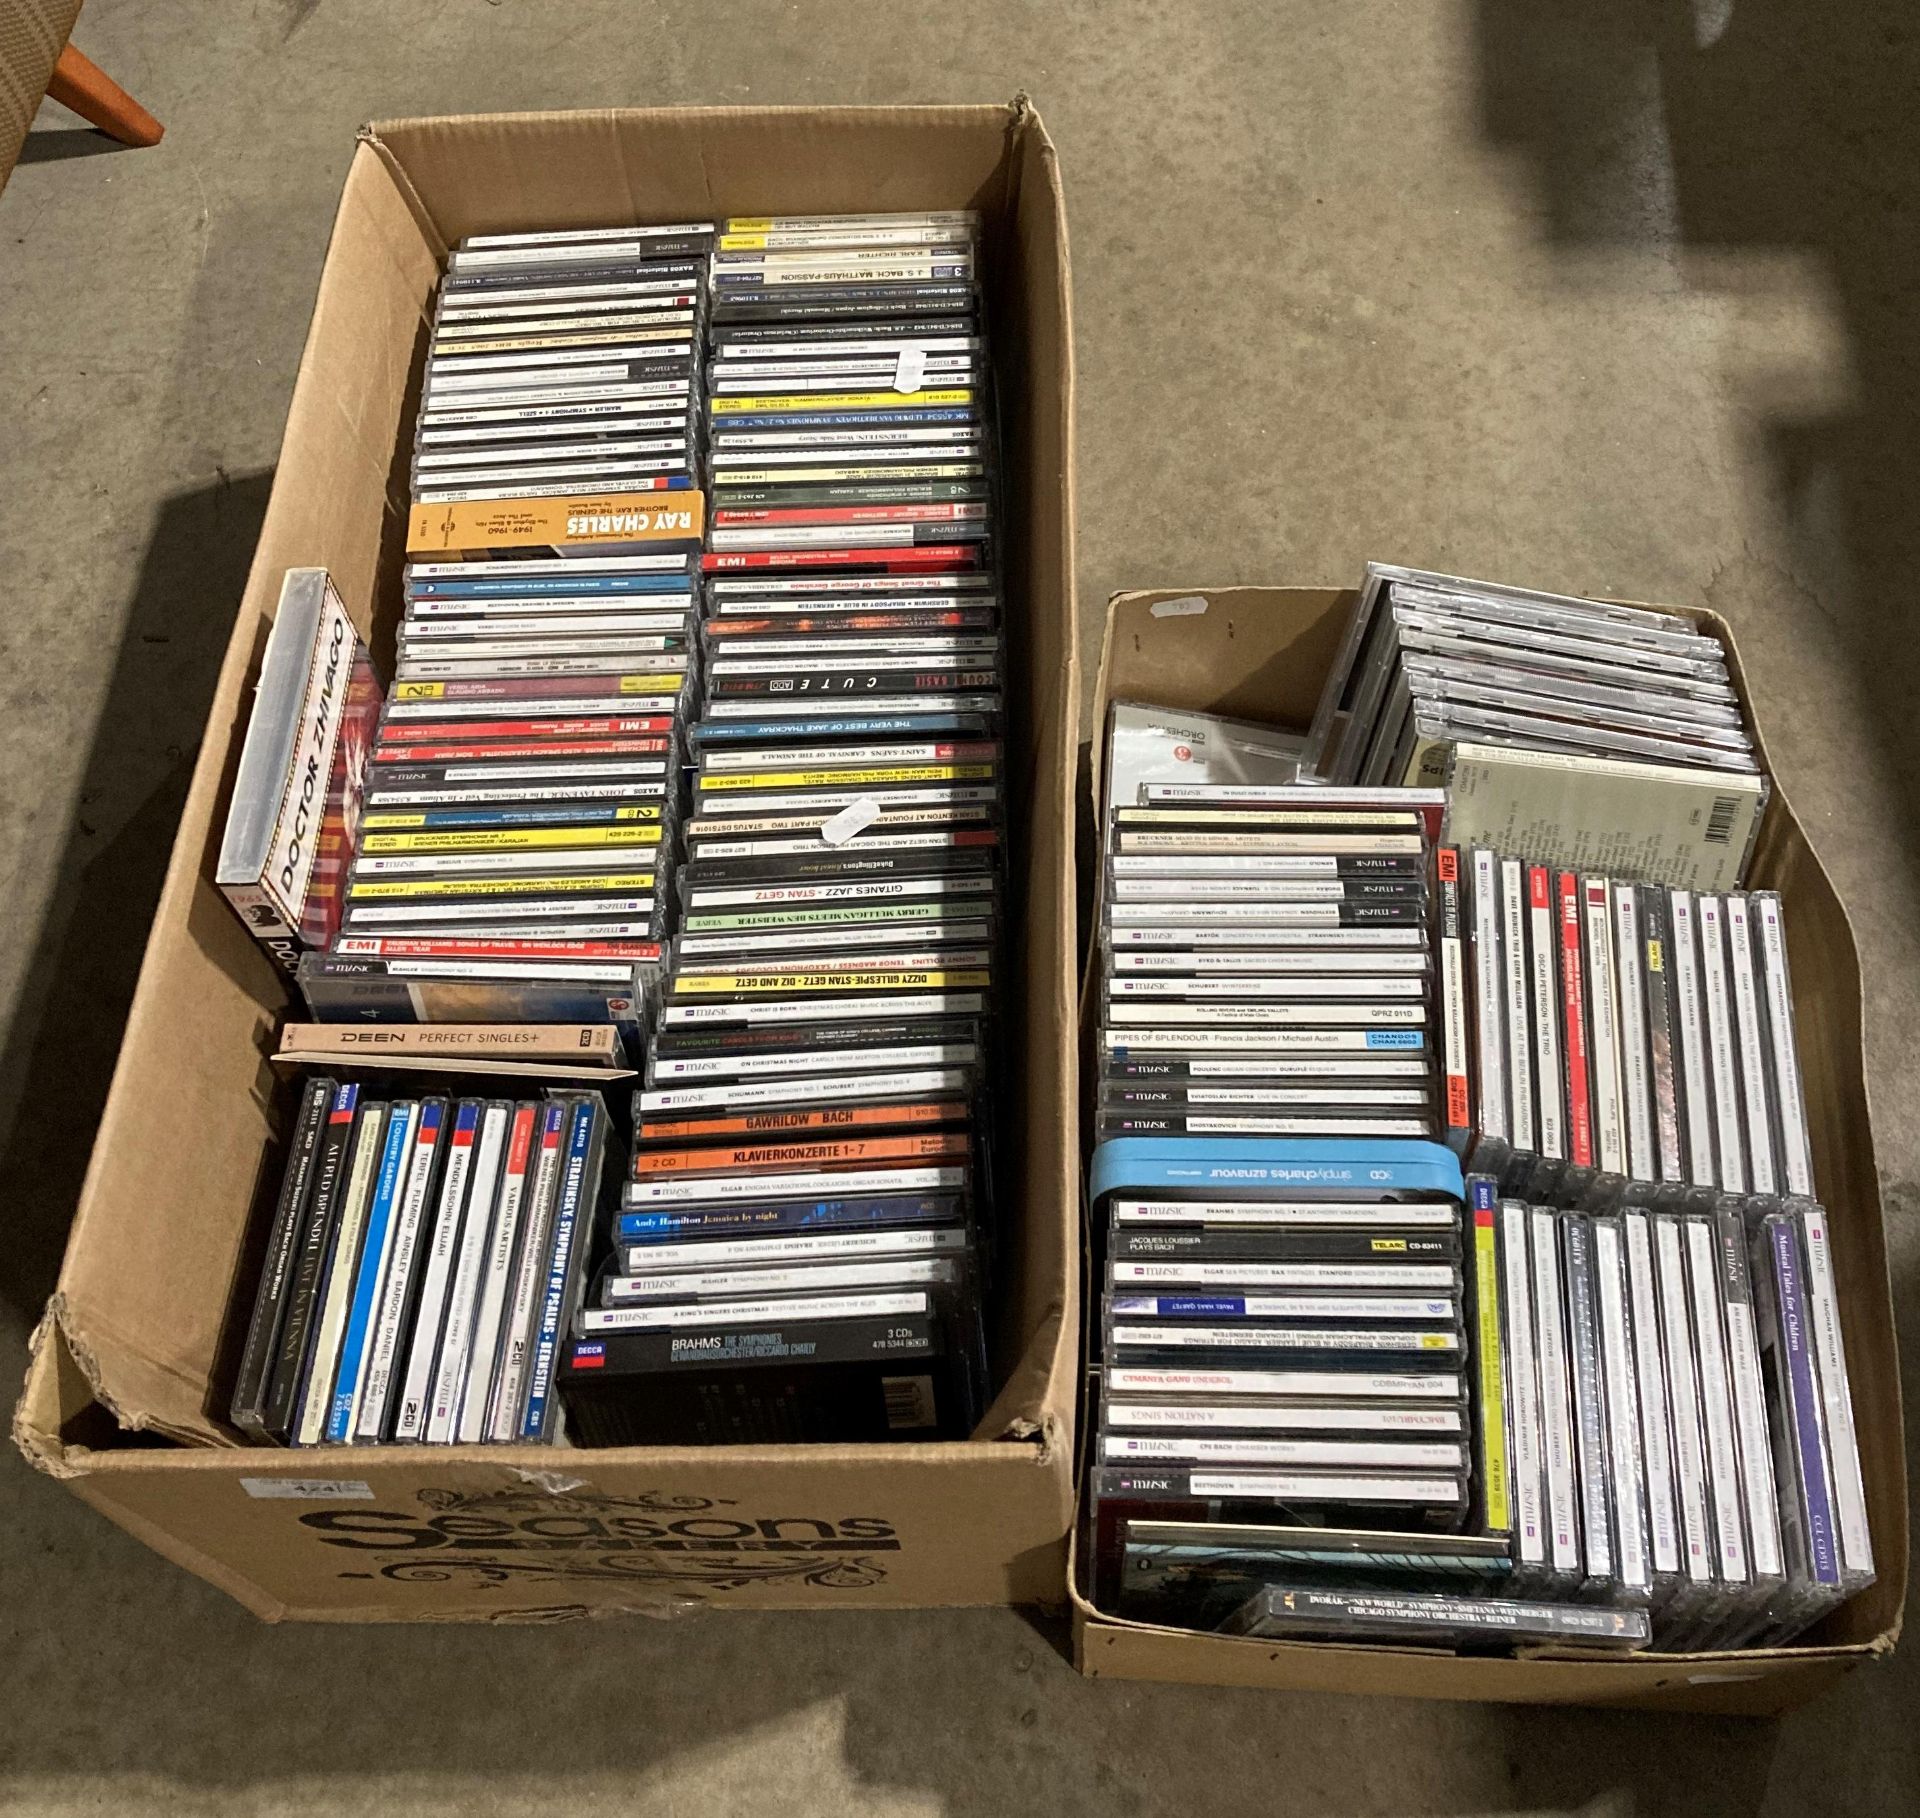 Contents to two boxes - approximately 160 assorted CDs, classical, easy listening,